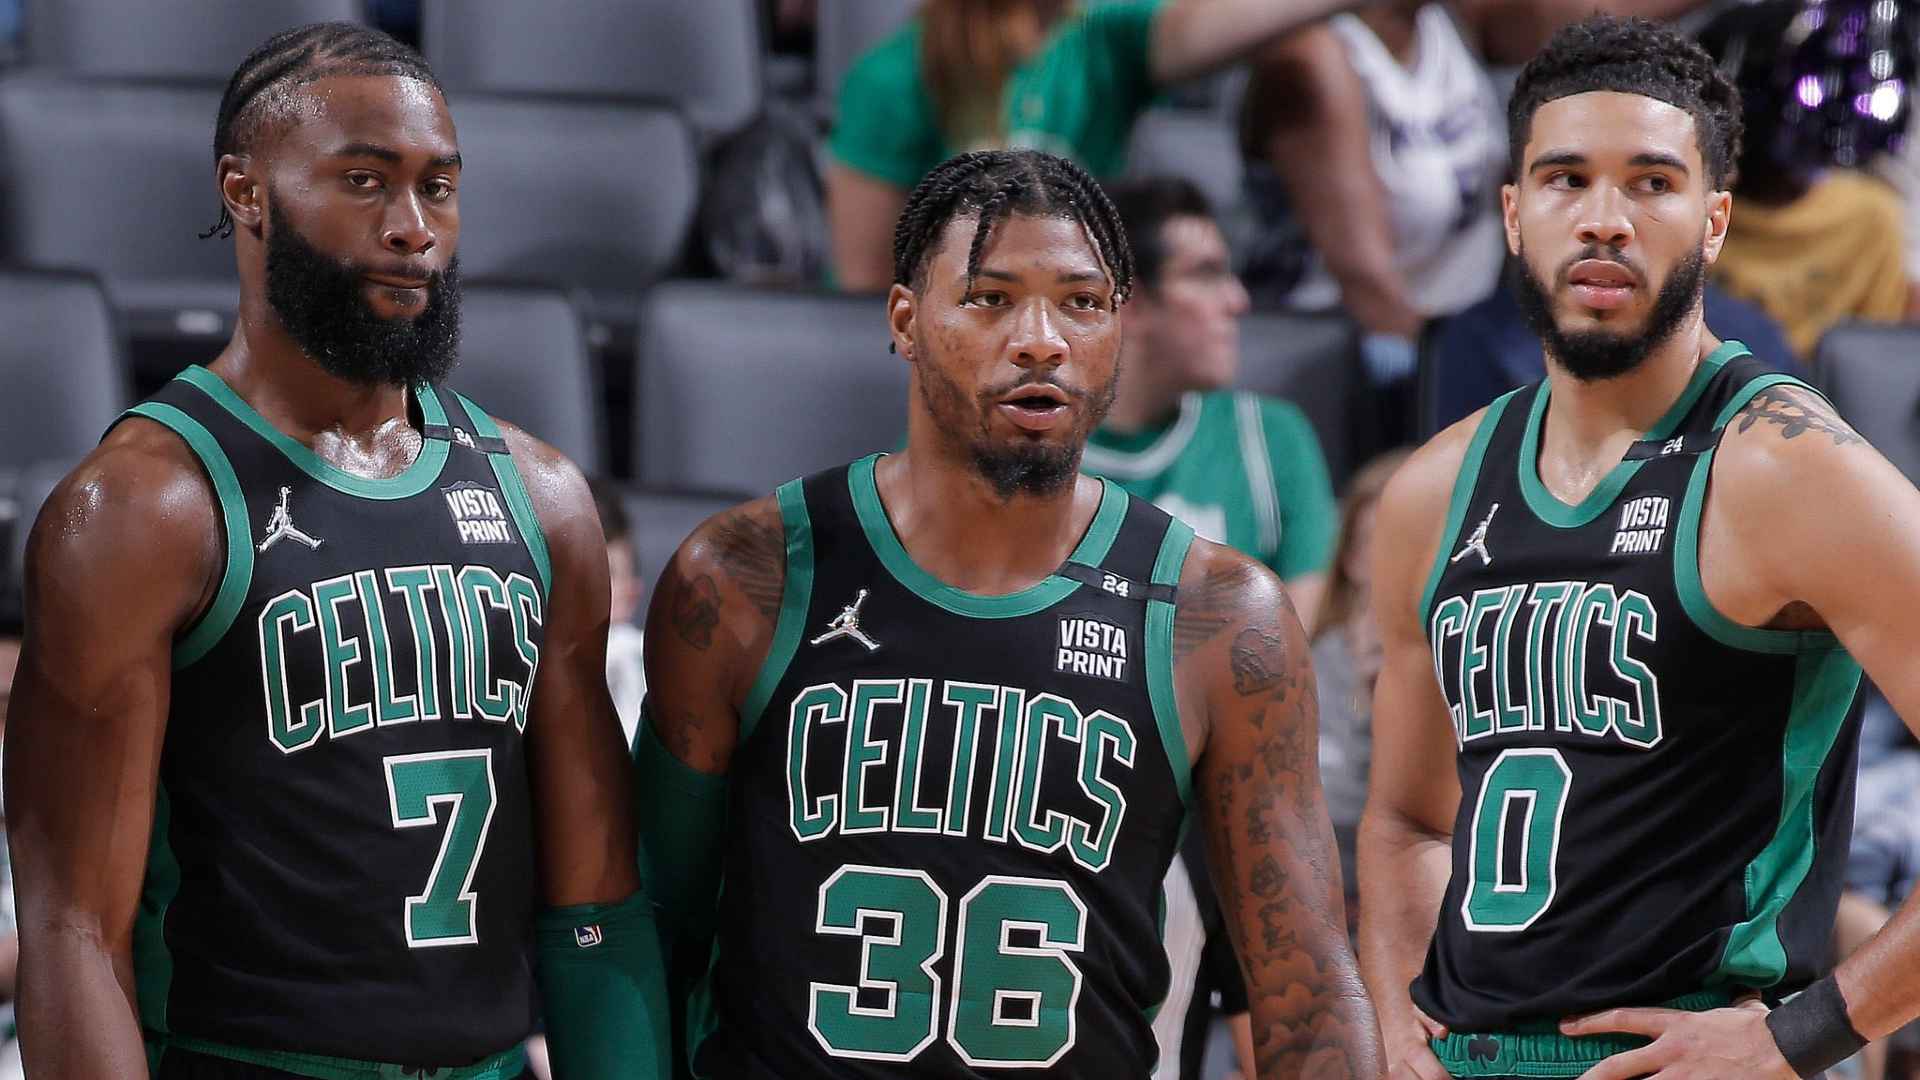 Jaylen Brown, Marcus Smart and Jayson Tatum of the Boston Celtics in a file photo. (Image credits: twitter)